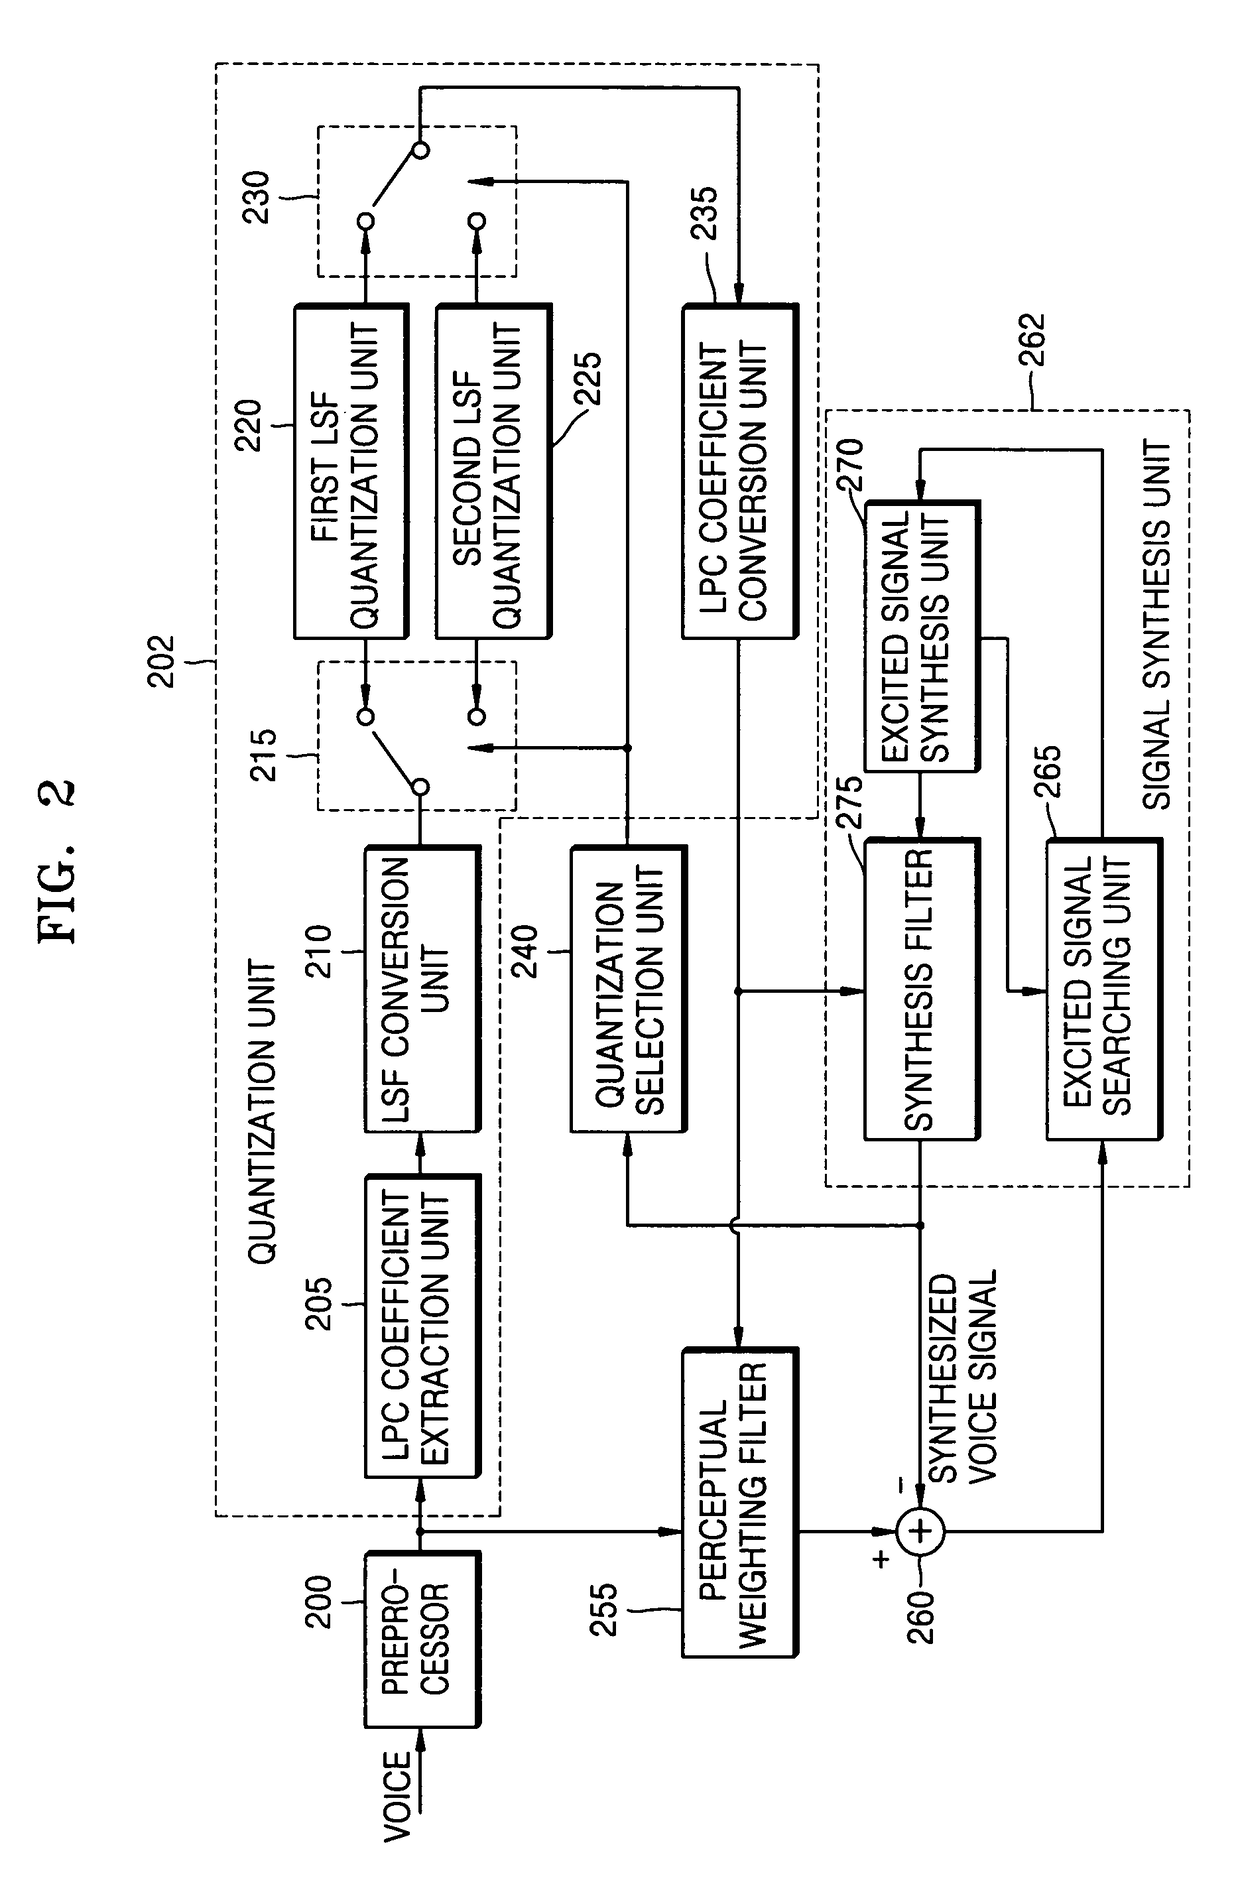 Apparatus and method of encoding/decoding voice for selecting quantization/dequantization using characteristics of synthesized voice